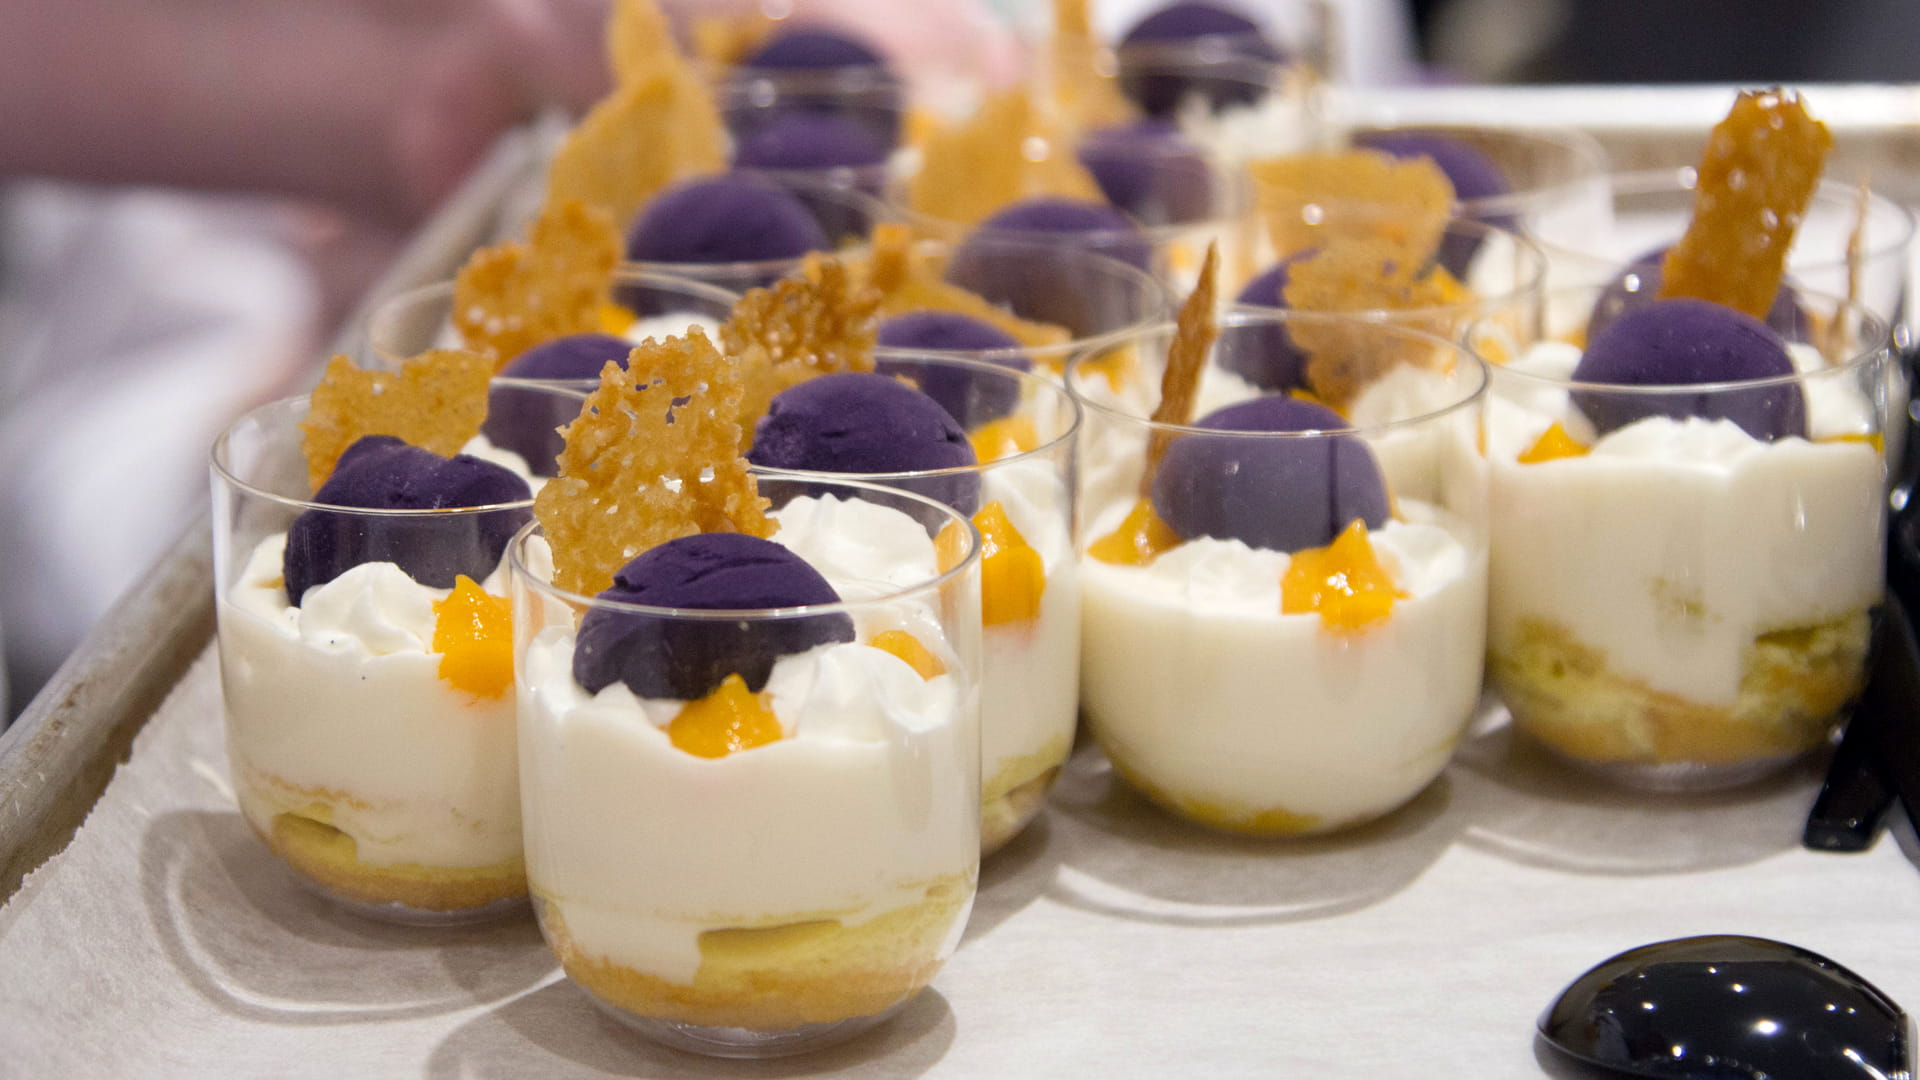 Photos of the Tres Leches dessert samples.